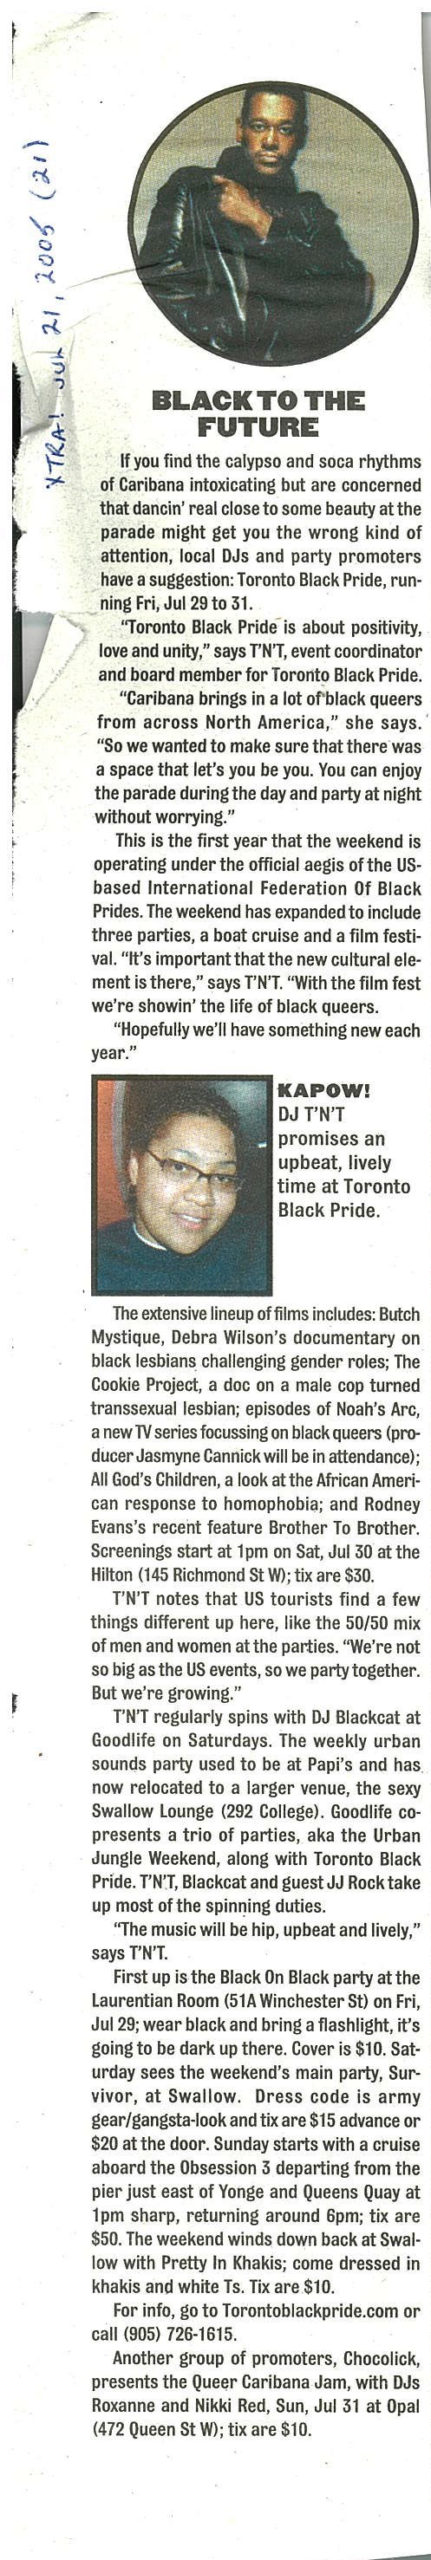 Newspaper clipping. At the top, there is a photo of a person with short hair wearing a black jacket; in the middle of the article, there is a photo of a smiling person wearing rectangular-framed glasses.